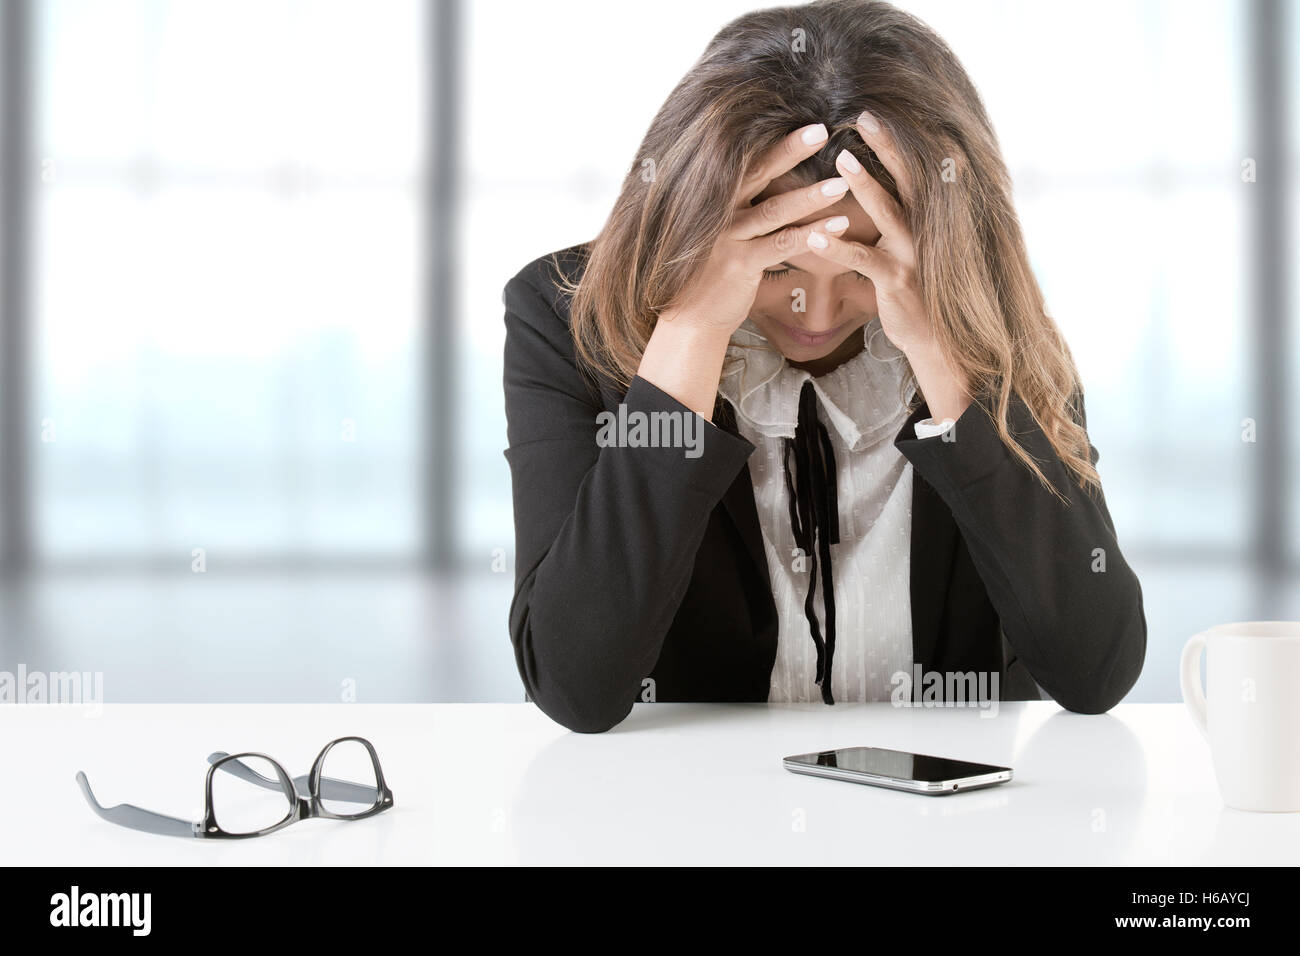 Businesswoman sitting at her desk depressed after receiving bad news, isolated in white Stock Photo